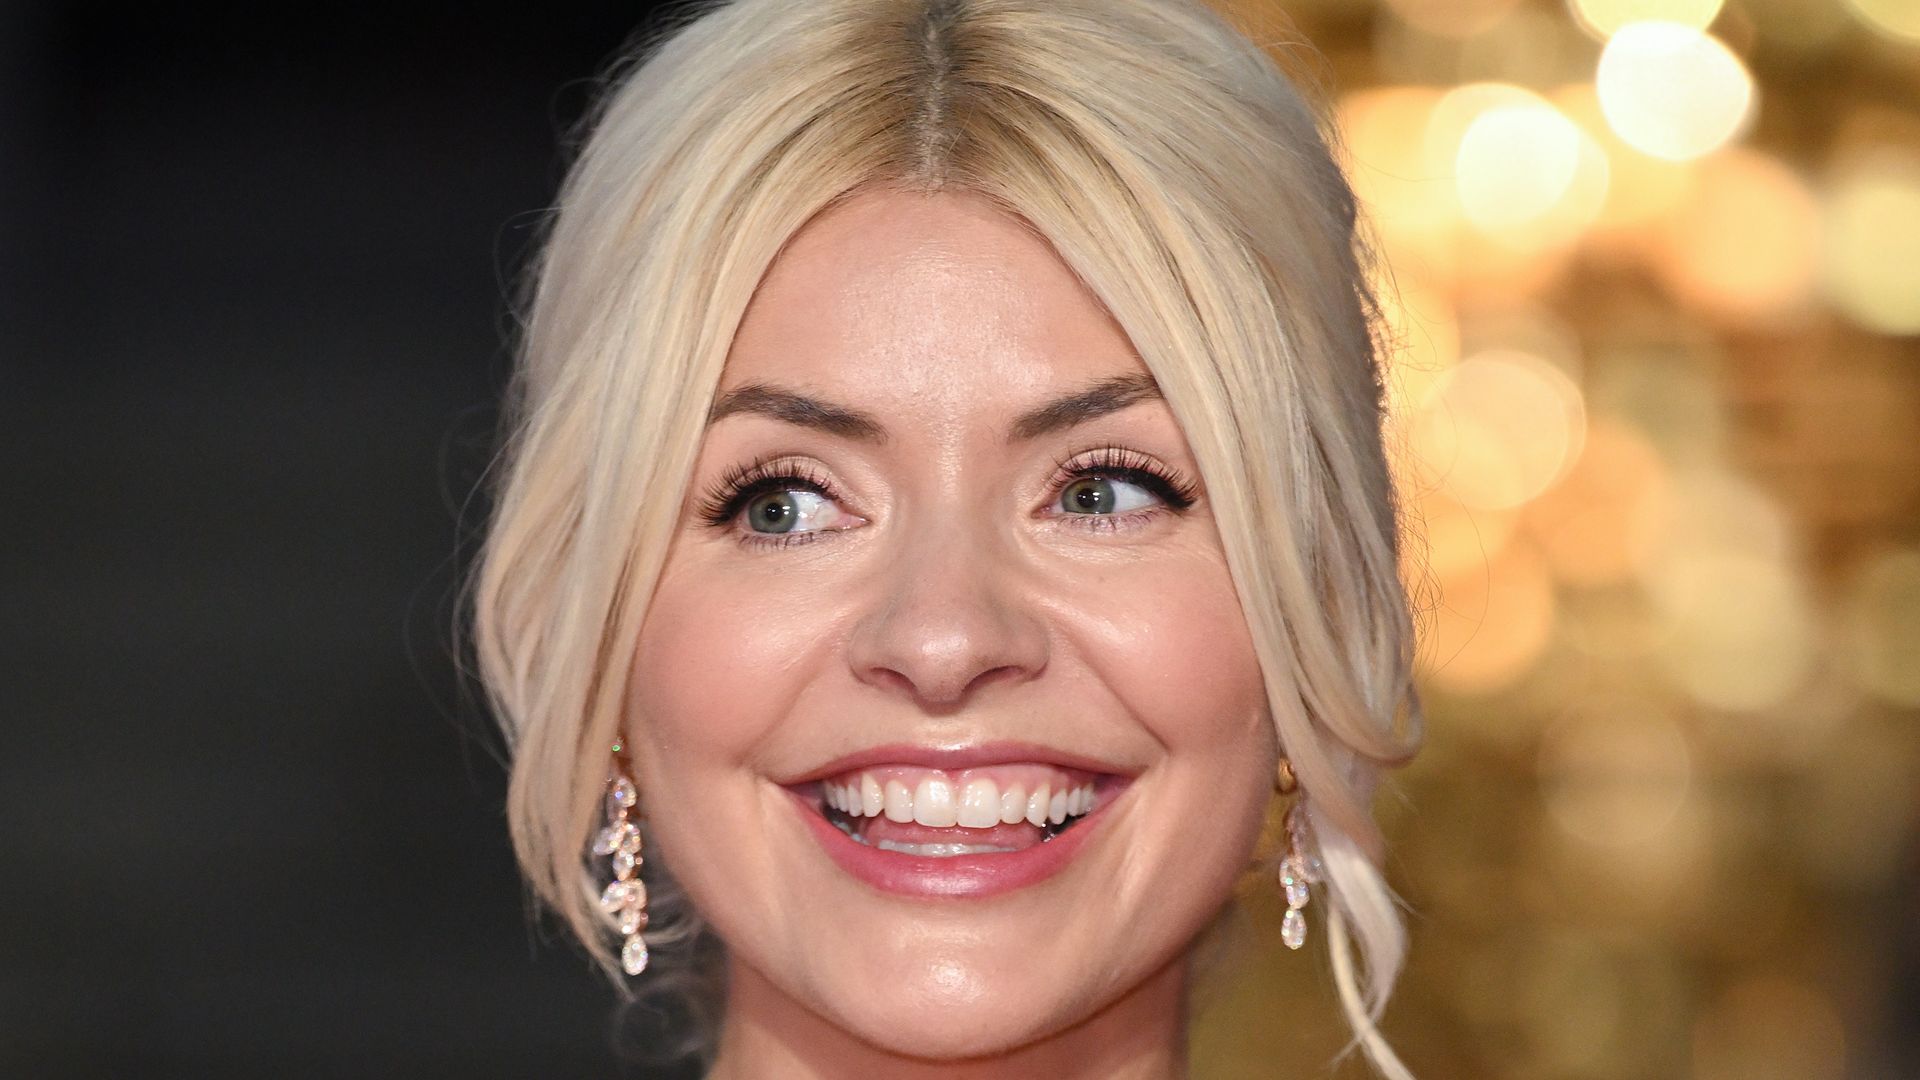 Holly Willoughby smiling